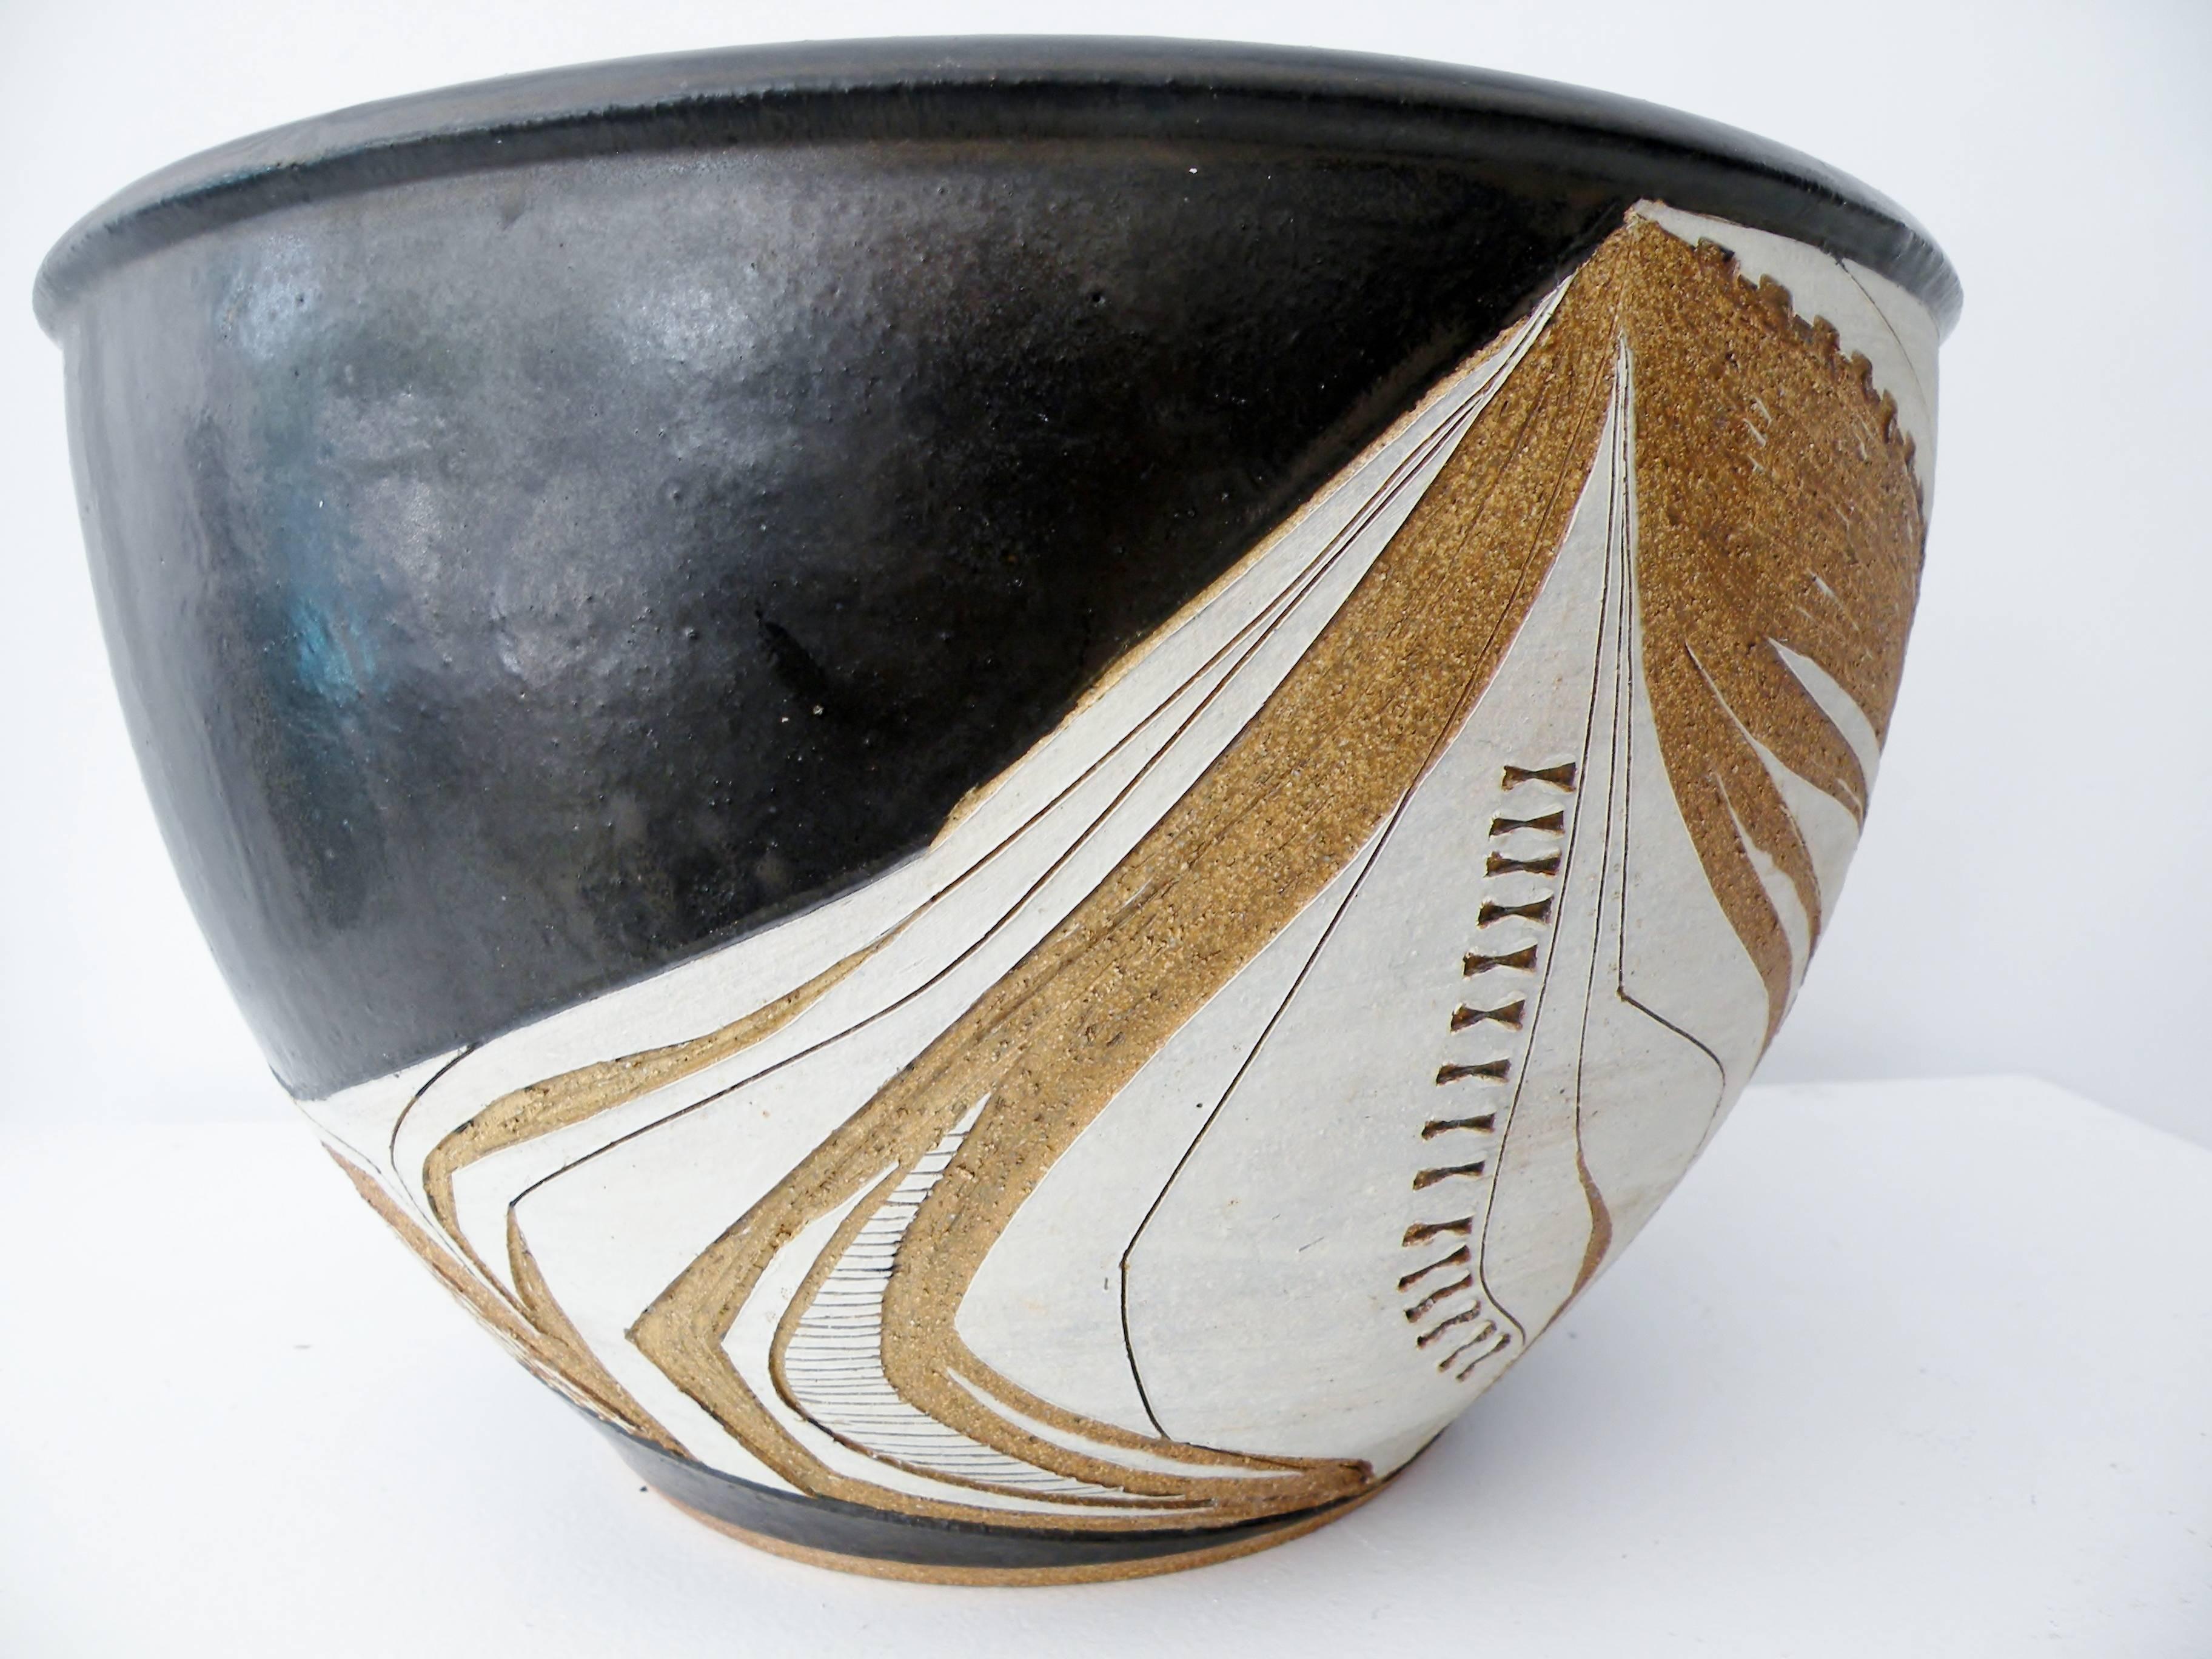 Joel Edwards Abstract California Studio Pottery Large Bowl or Planter In Excellent Condition For Sale In Denver, CO